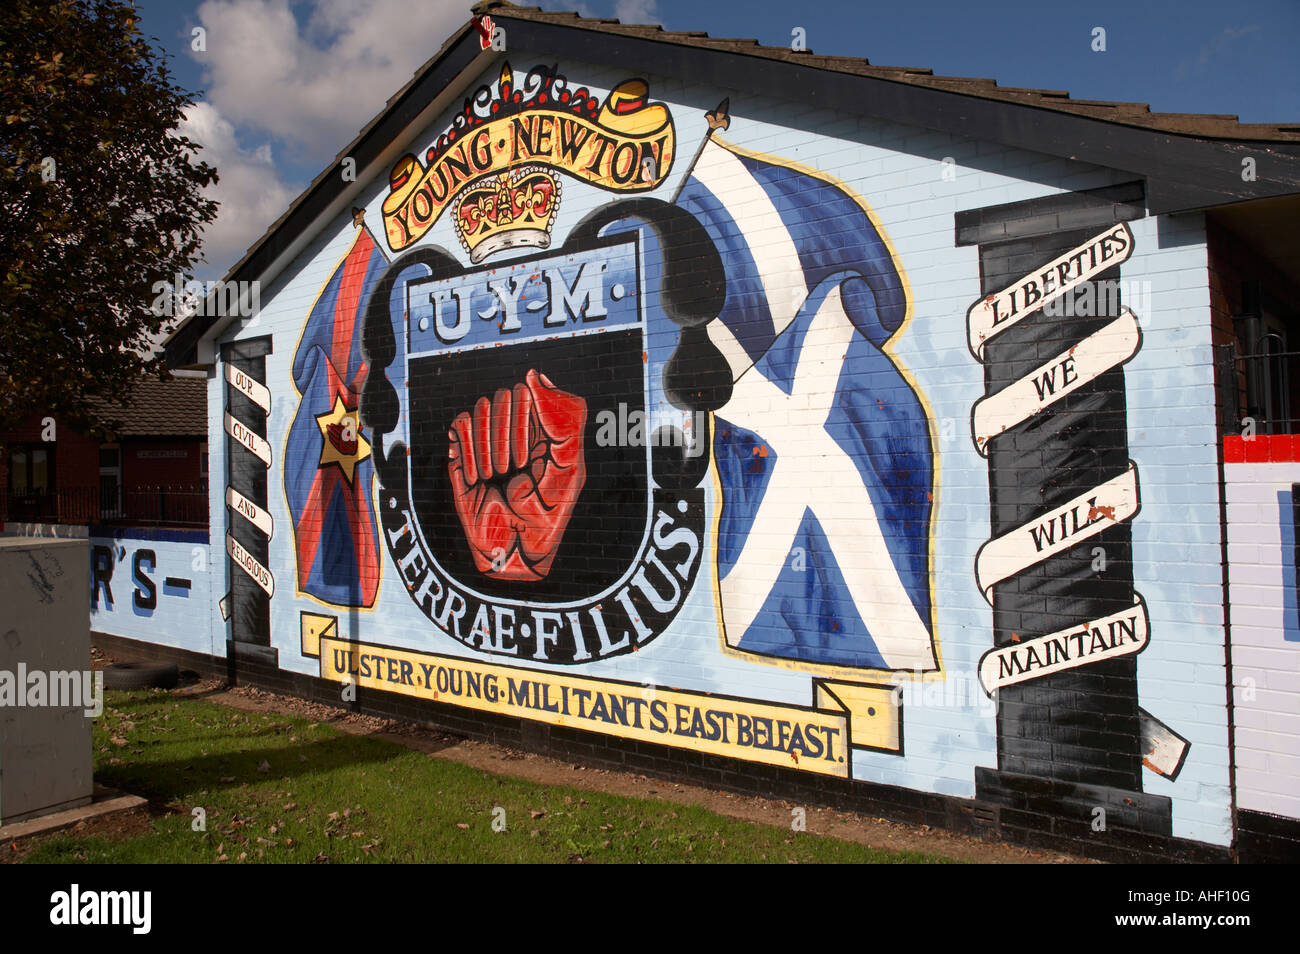 loyalist murals in Lower Newtownards Road area of protestant East Belfast Northern Ireland  Young Newton Ulster Young Militant Stock Photo